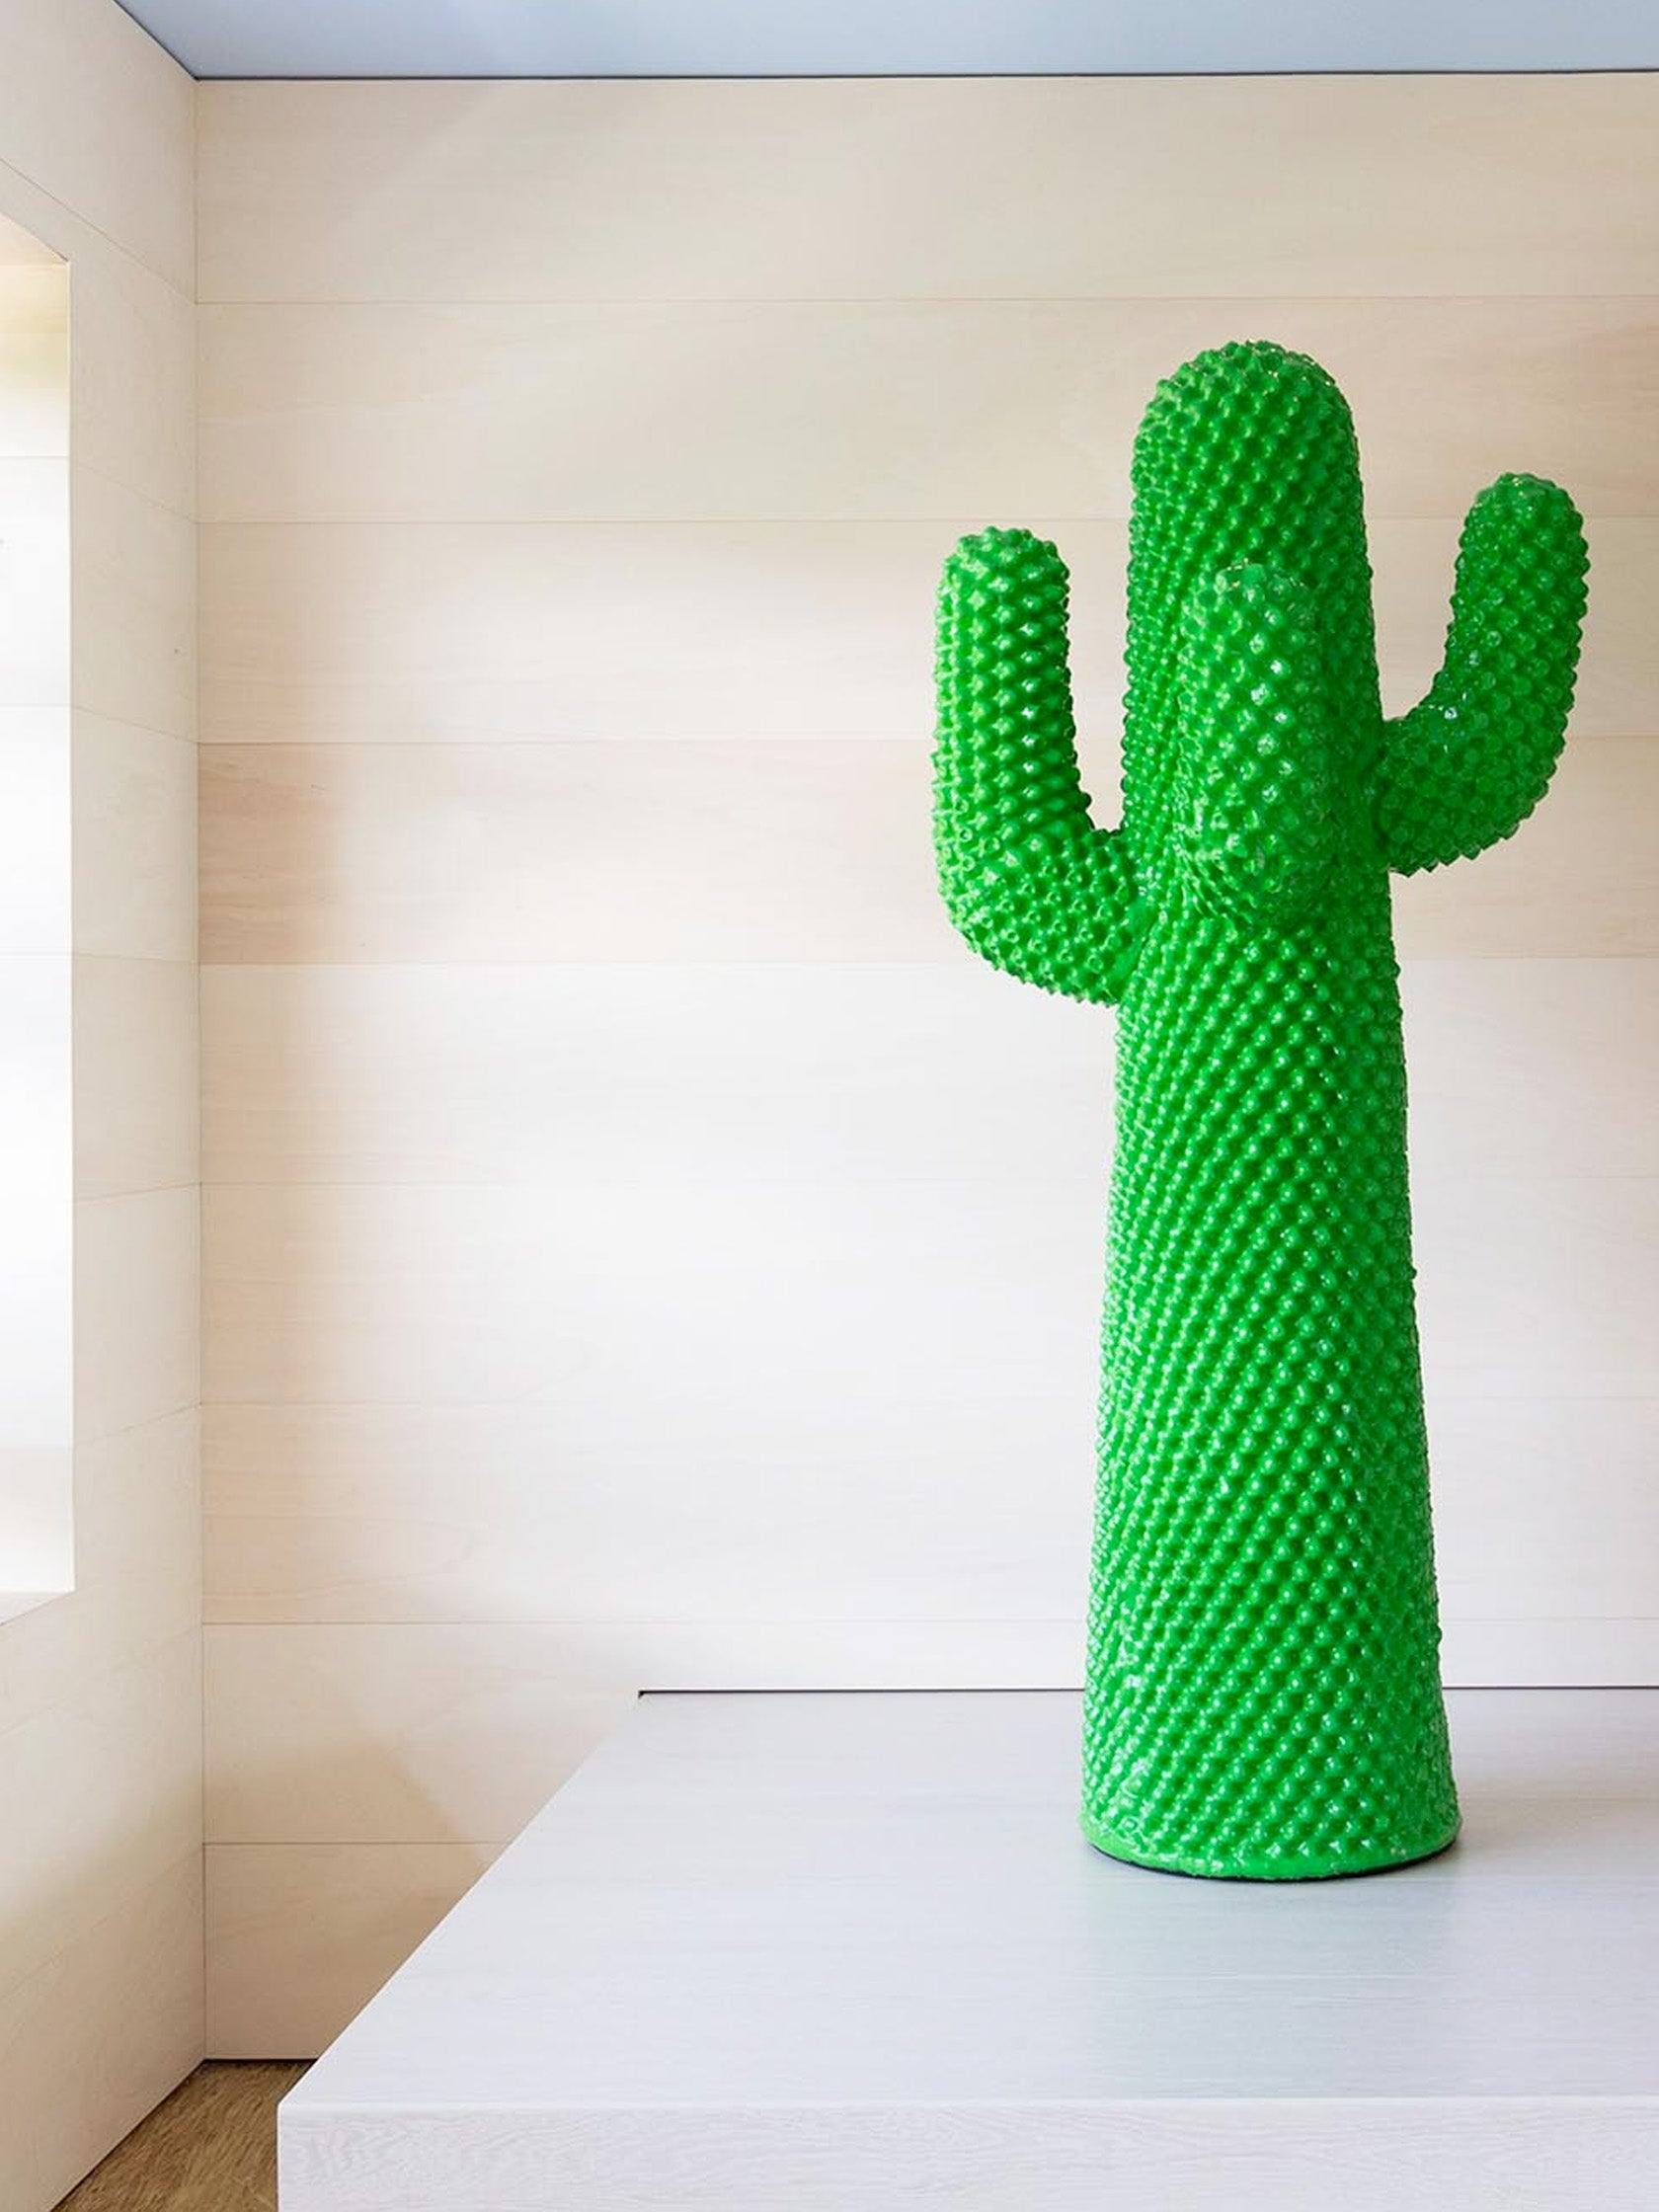 Another Green Cactus by Gufram - Mankovsky Gallery